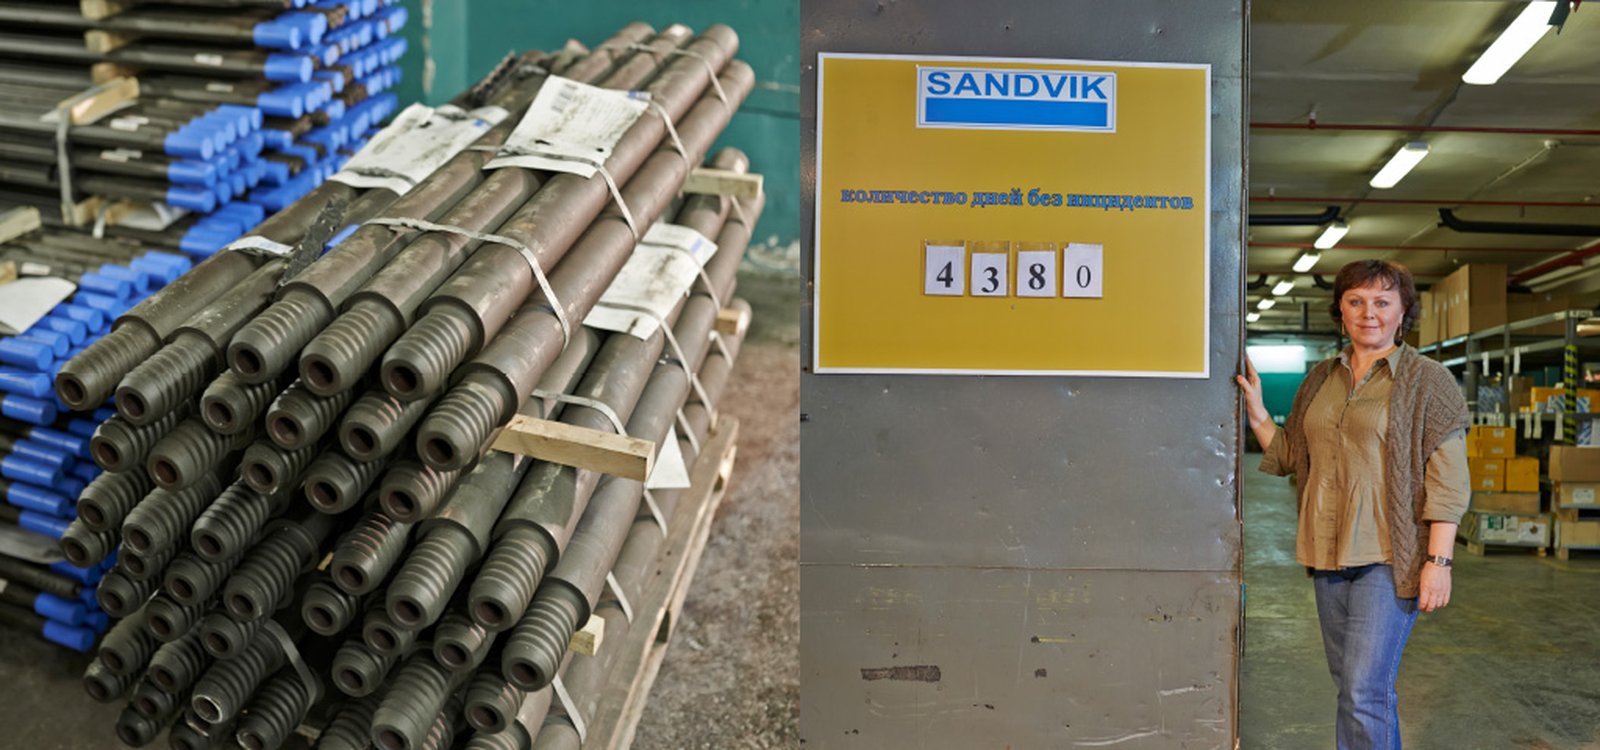 Sandvik has provided equipment, service and spare parts at Norilsk since 2002.